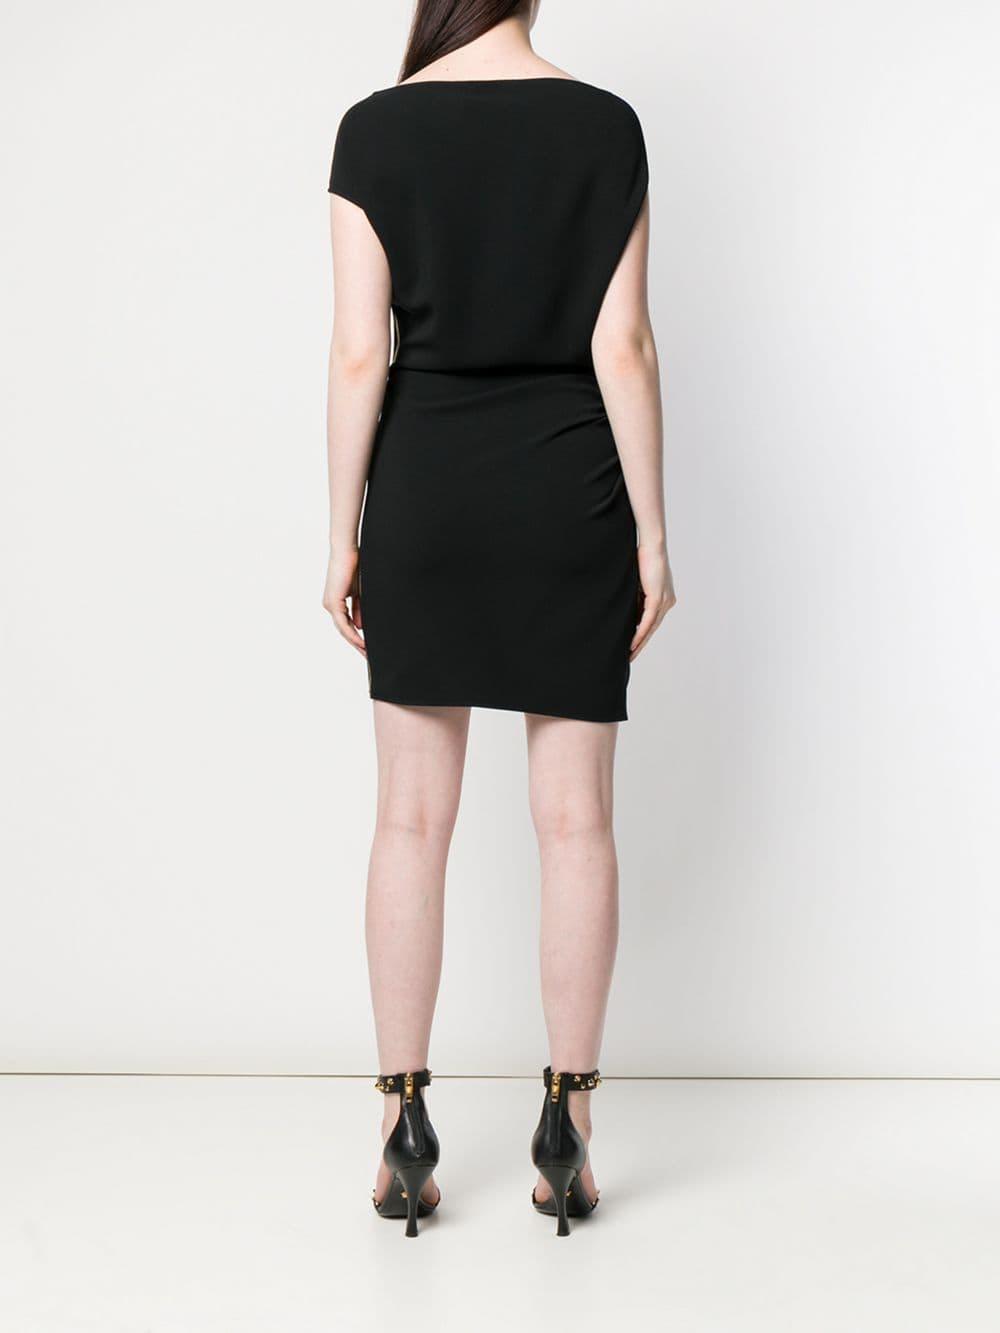 Versace Synthetic Cocktail Dress in Black - Lyst